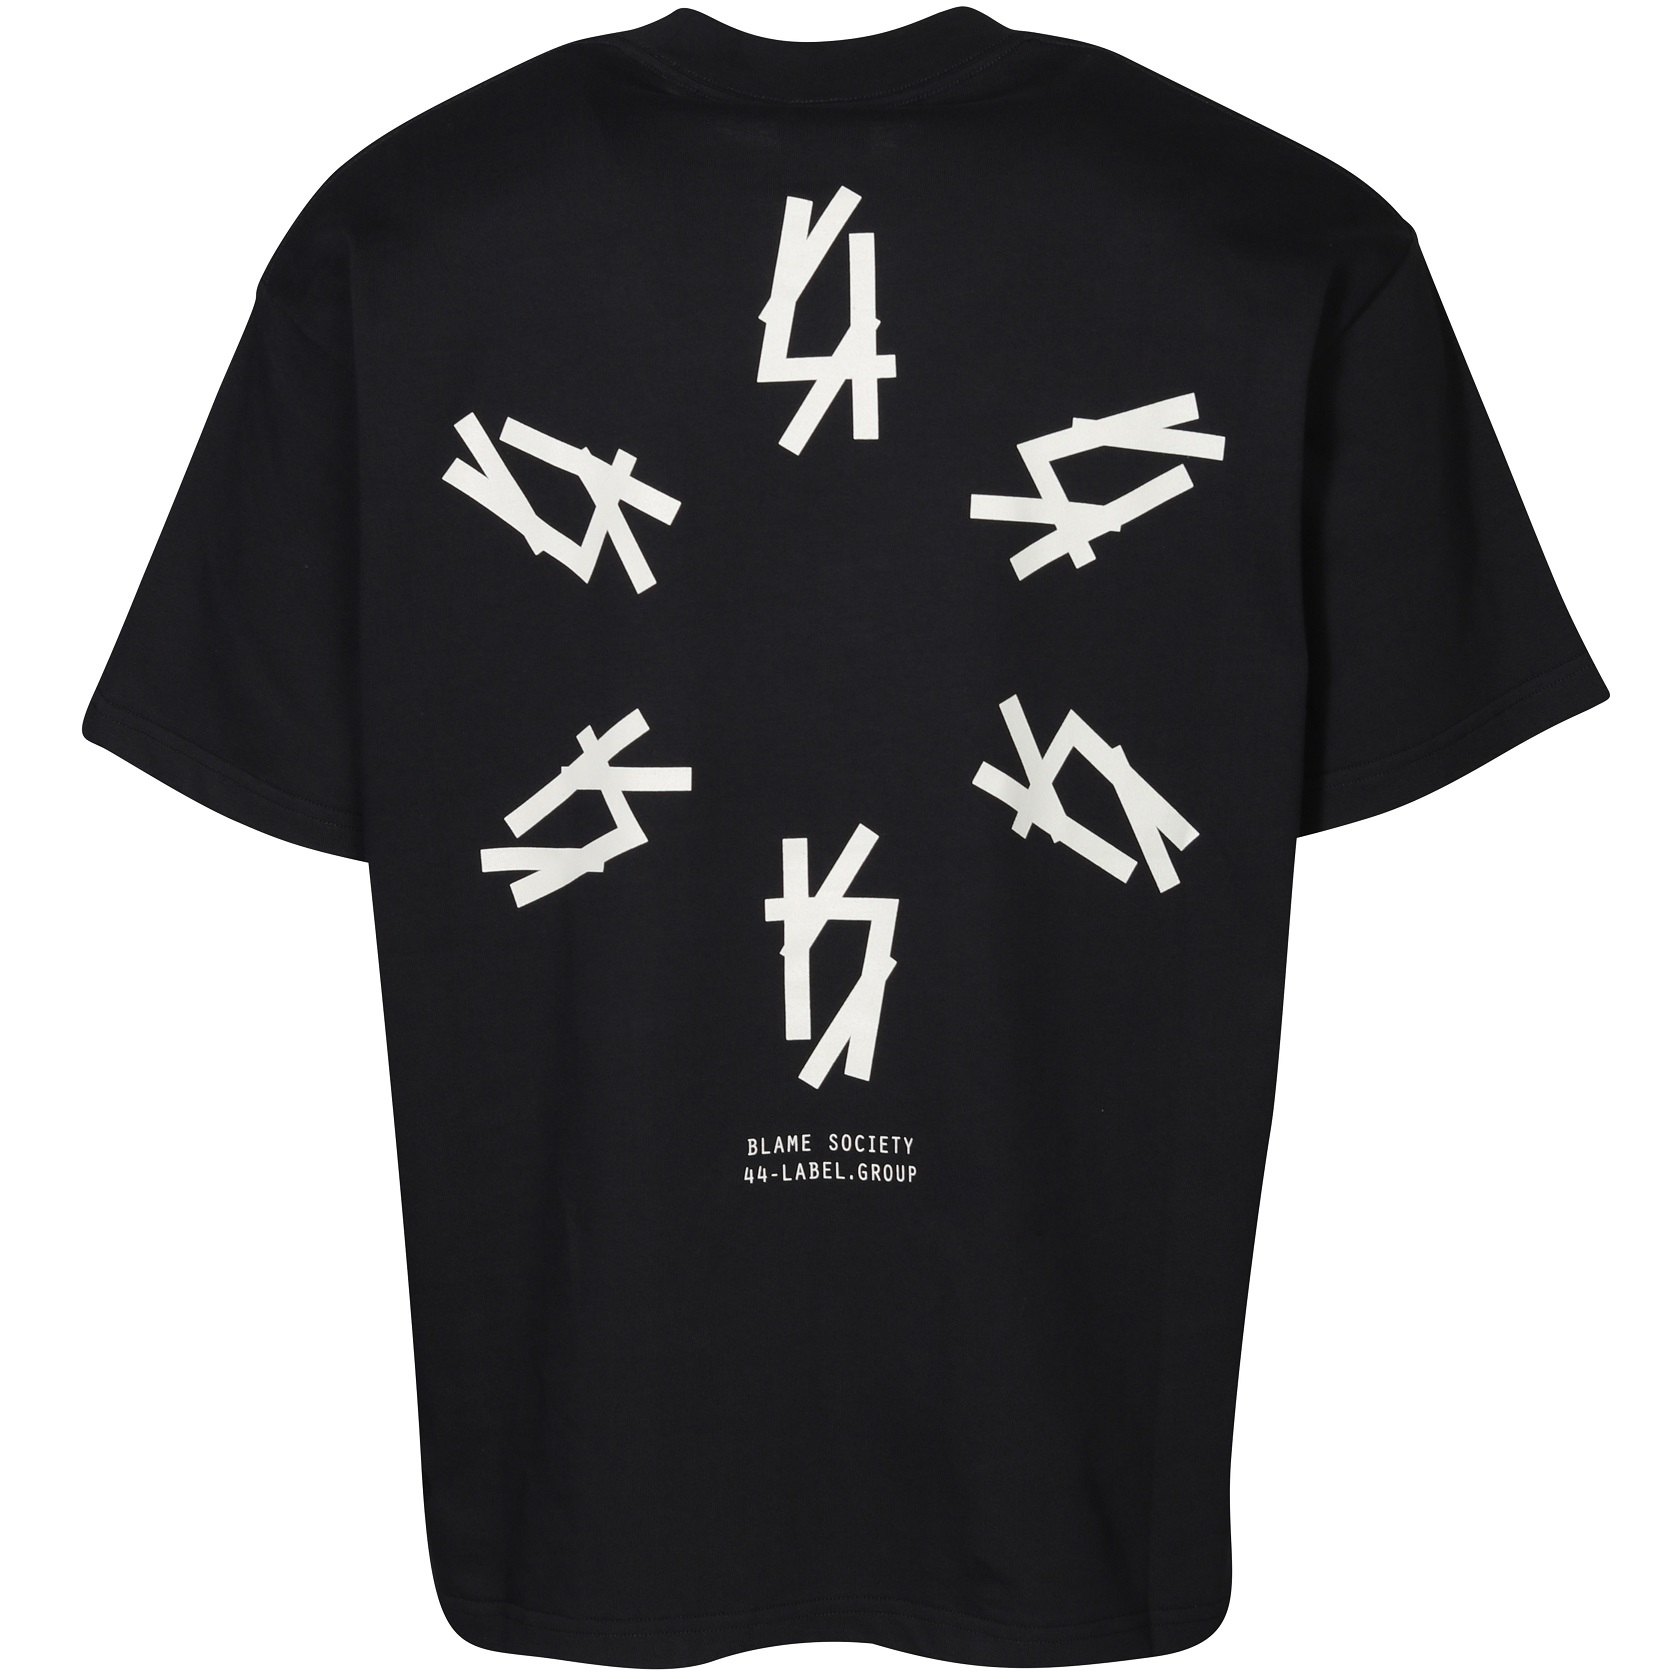 44 LABEL GROUP Continuum T-Shirt in Black